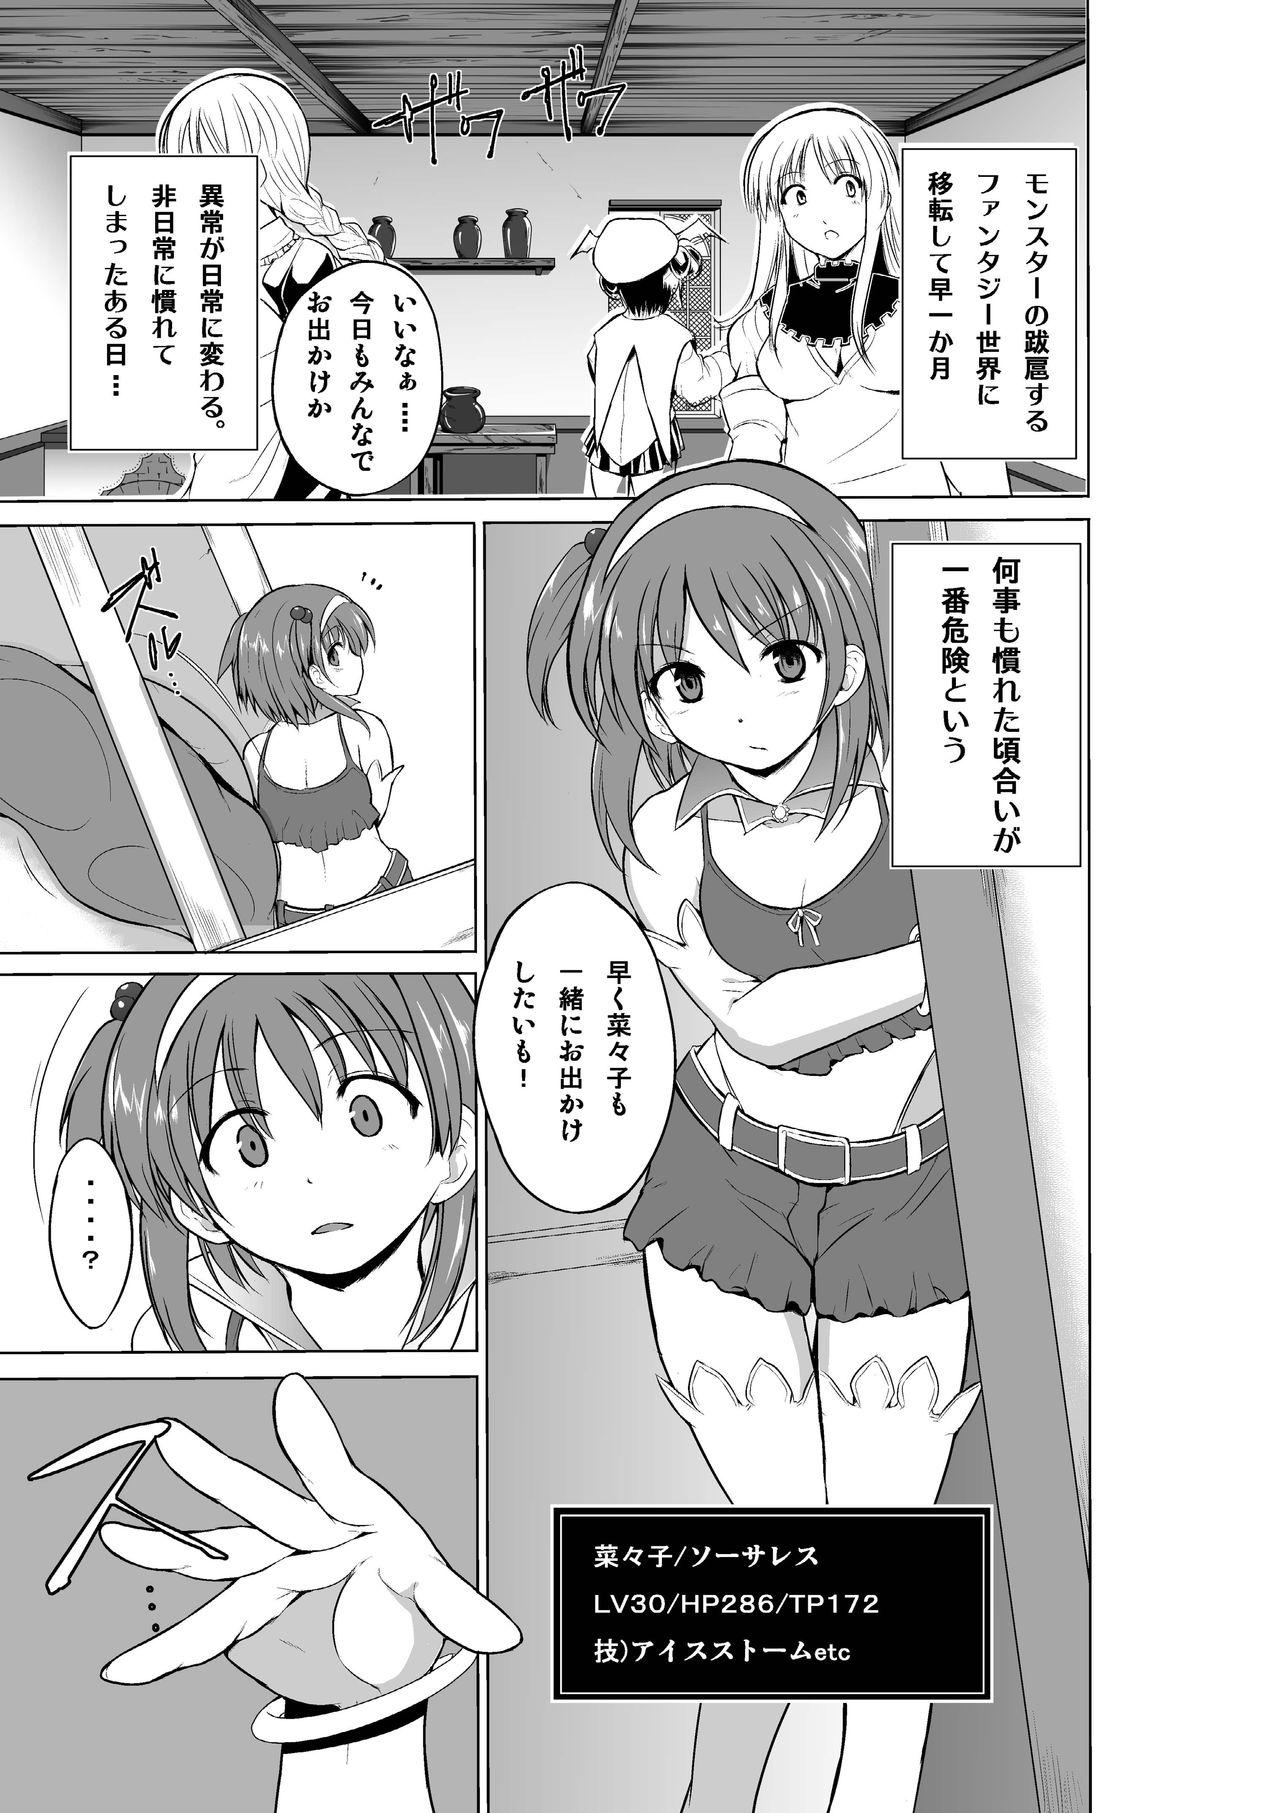 18 Year Old Dungeon Travelers - Nanako no Himegoto - Toheart2 Gay College - Page 3